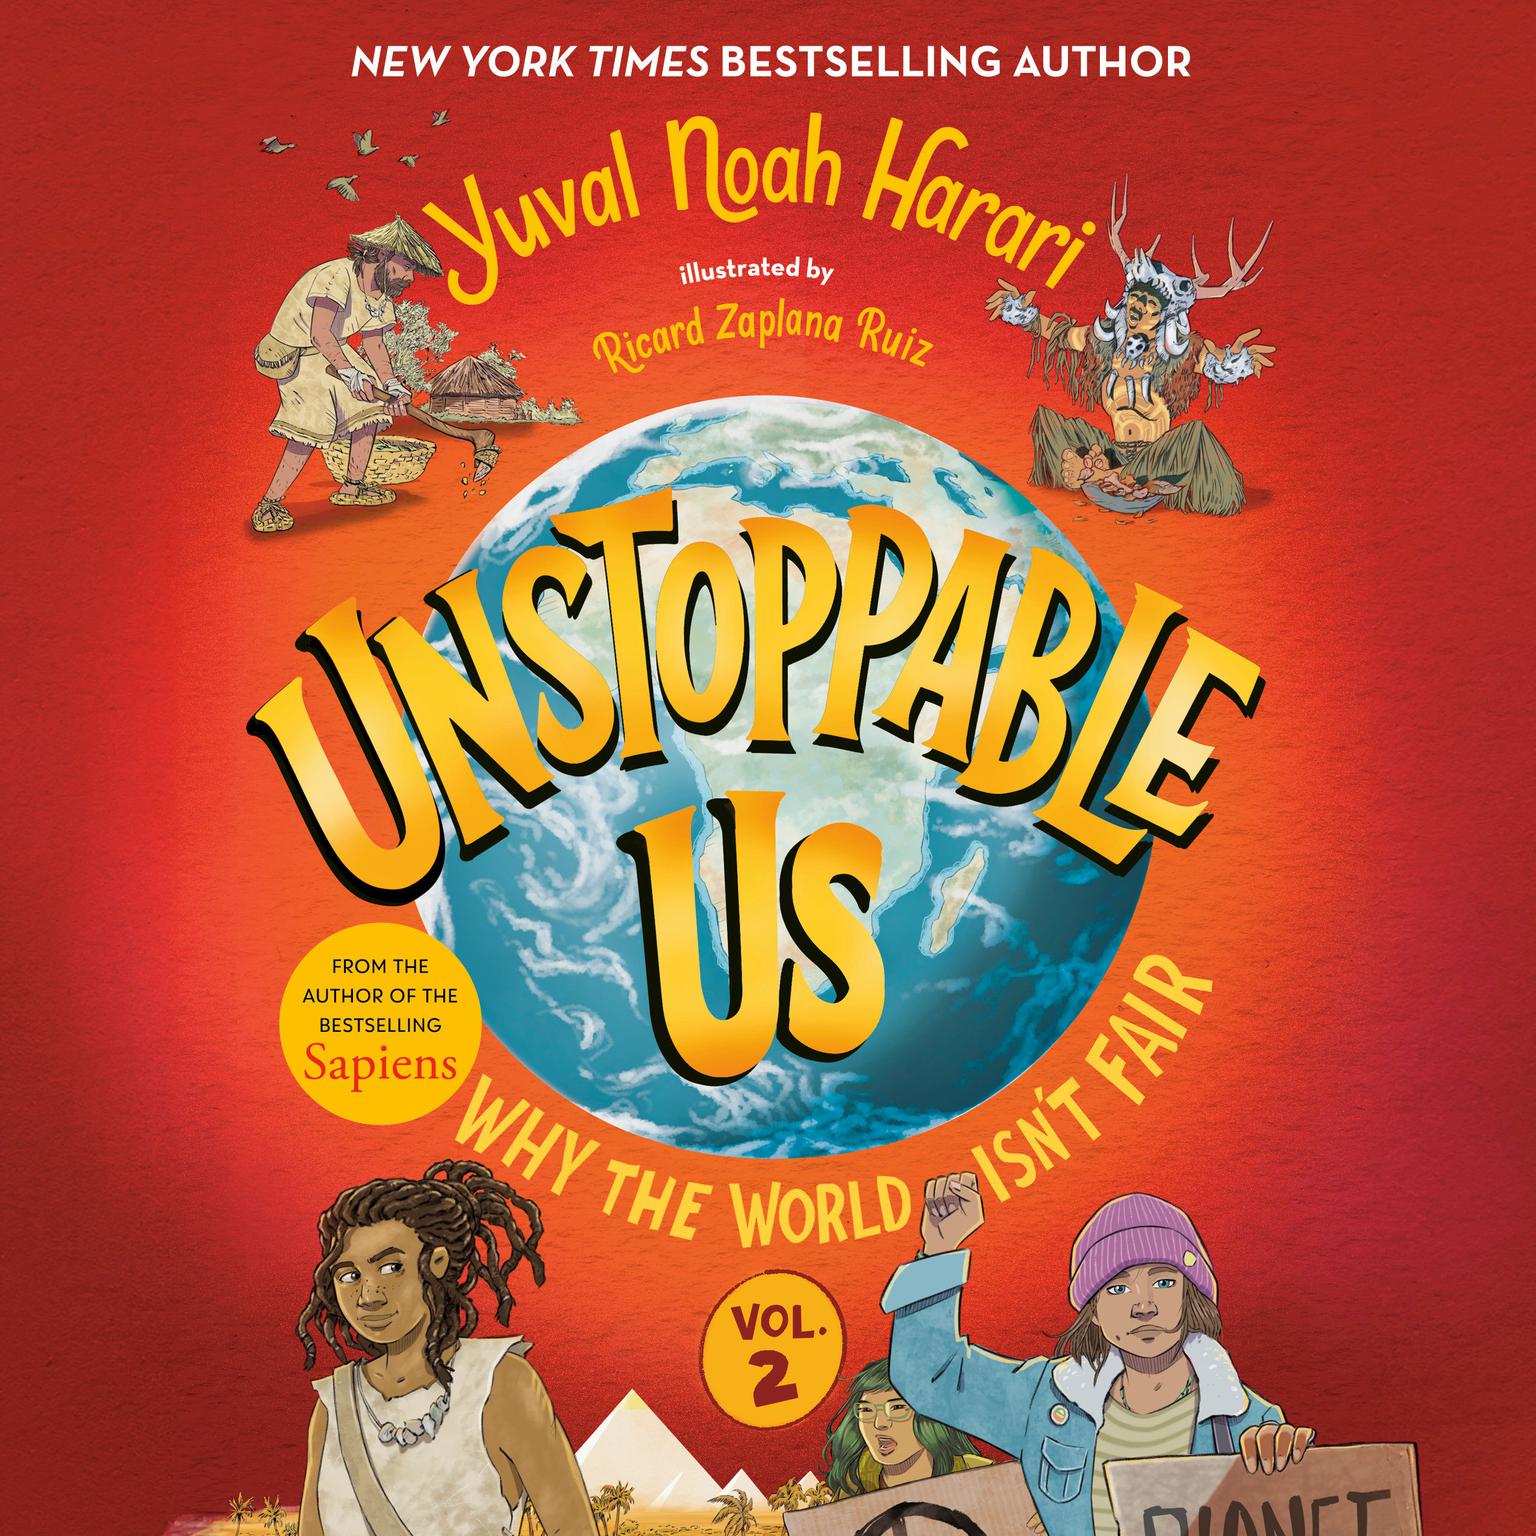 Unstoppable Us, Volume 2: Why the World Isnt Fair Audiobook, by Yuval Noah Harari